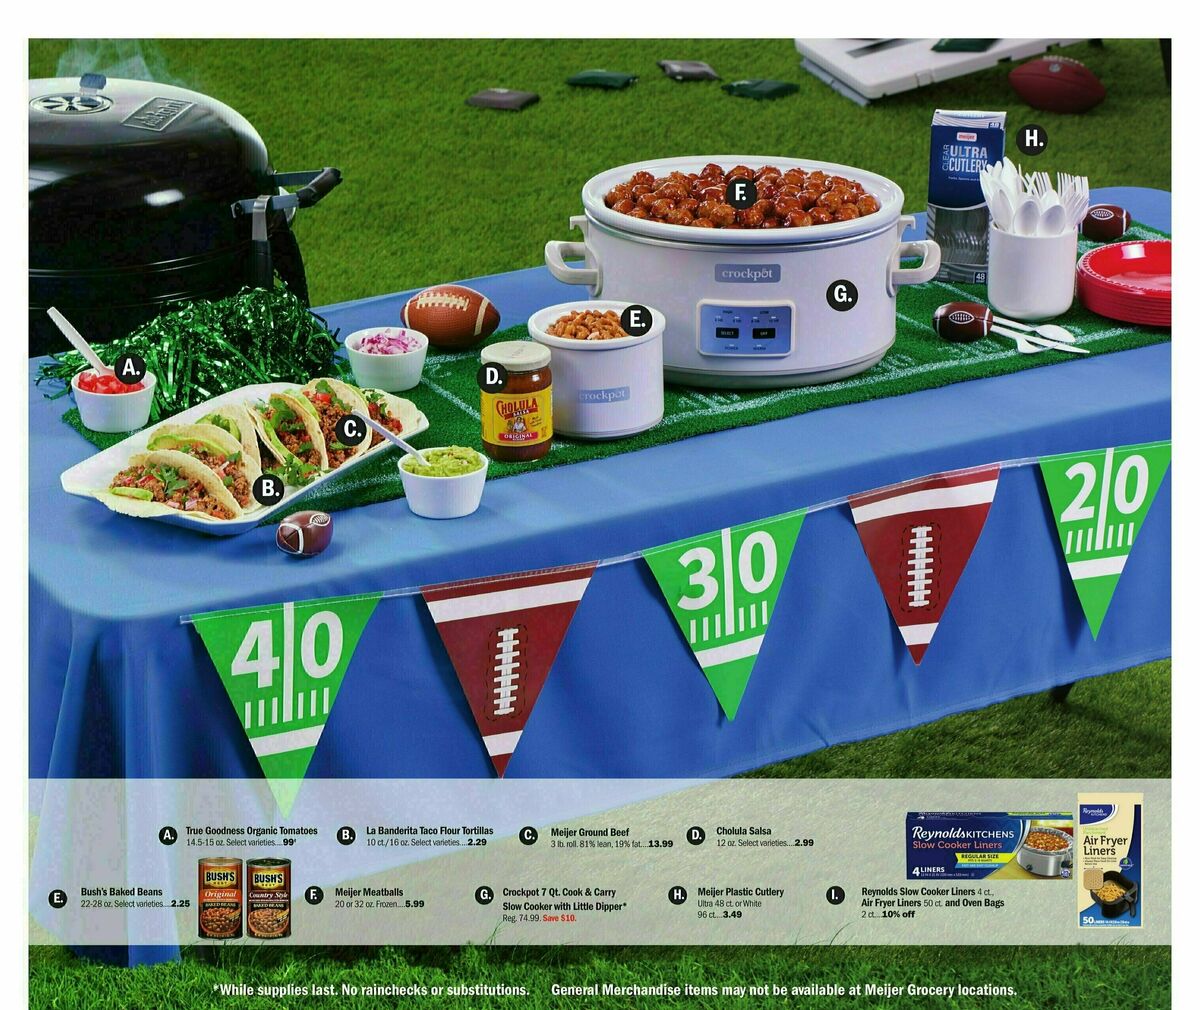 Meijer Tailgate Ad Weekly Ad from September 10